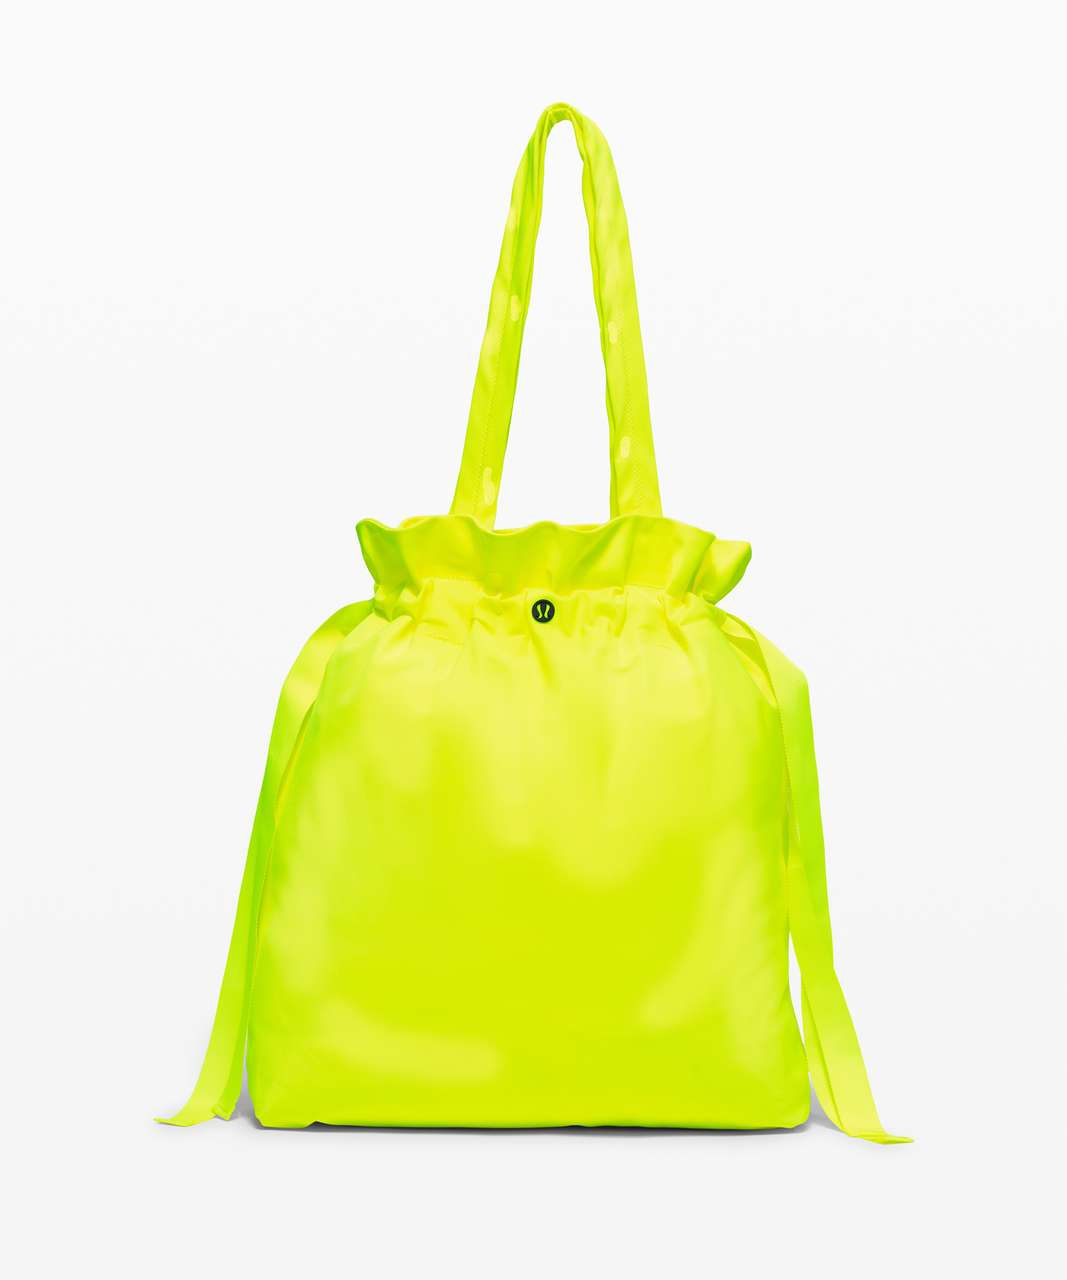 Lululemon Easy As Sunday Tote *19L - Highlight Yellow